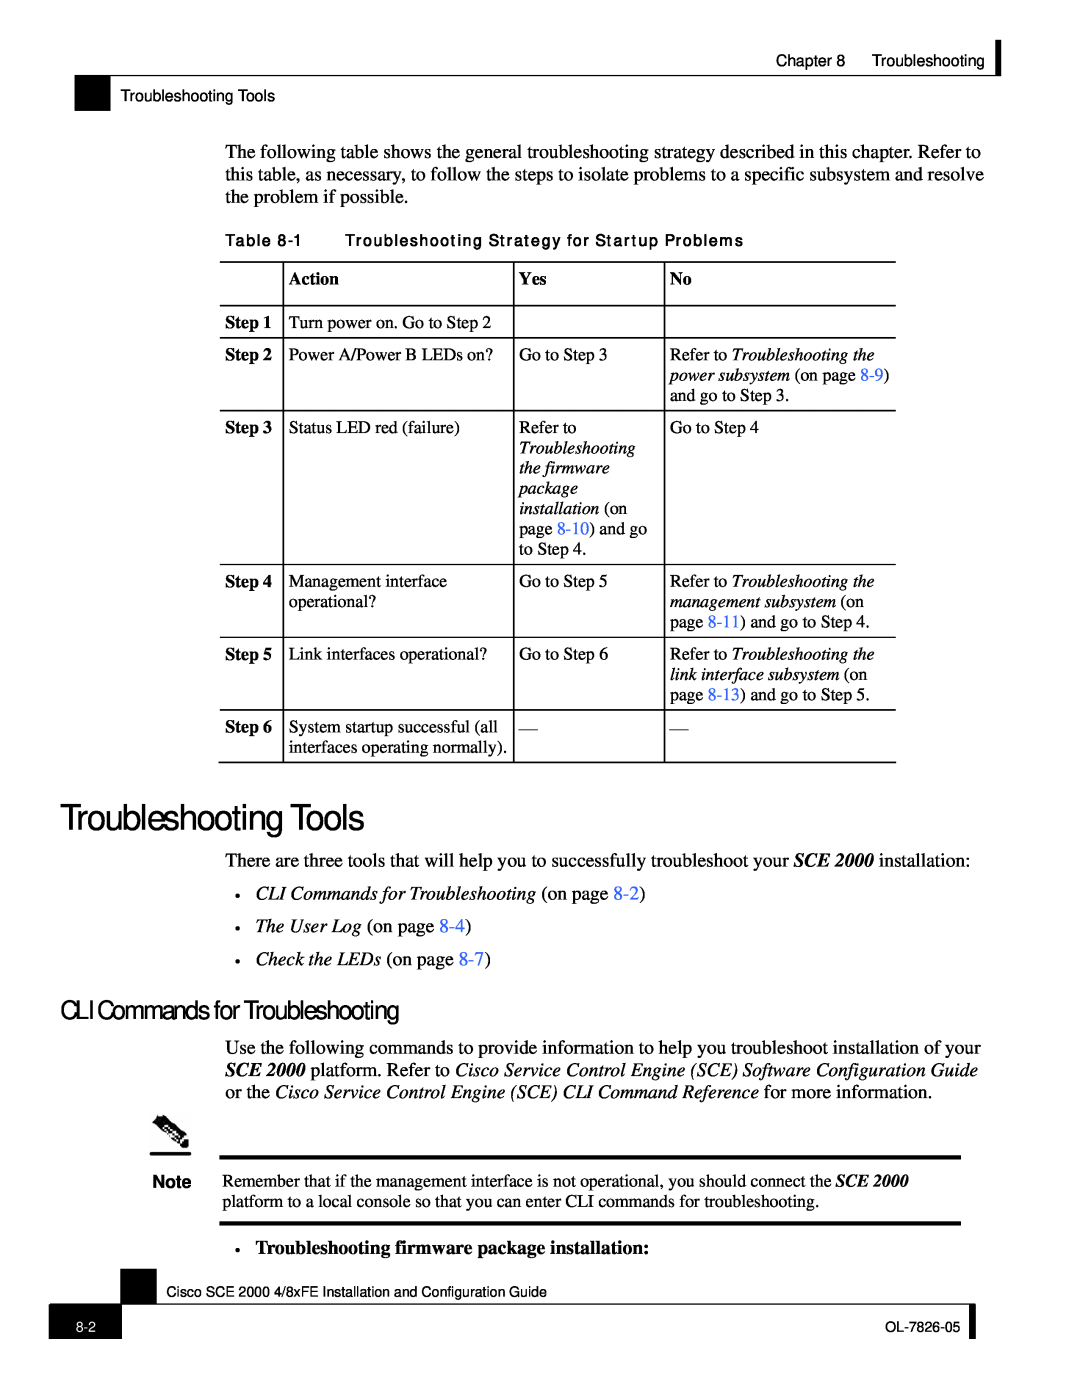 Cisco Systems SCE 2000 4/8xFE manual Troubleshooting Tools, CLI Commands for Troubleshooting, Check the LEDs on page 